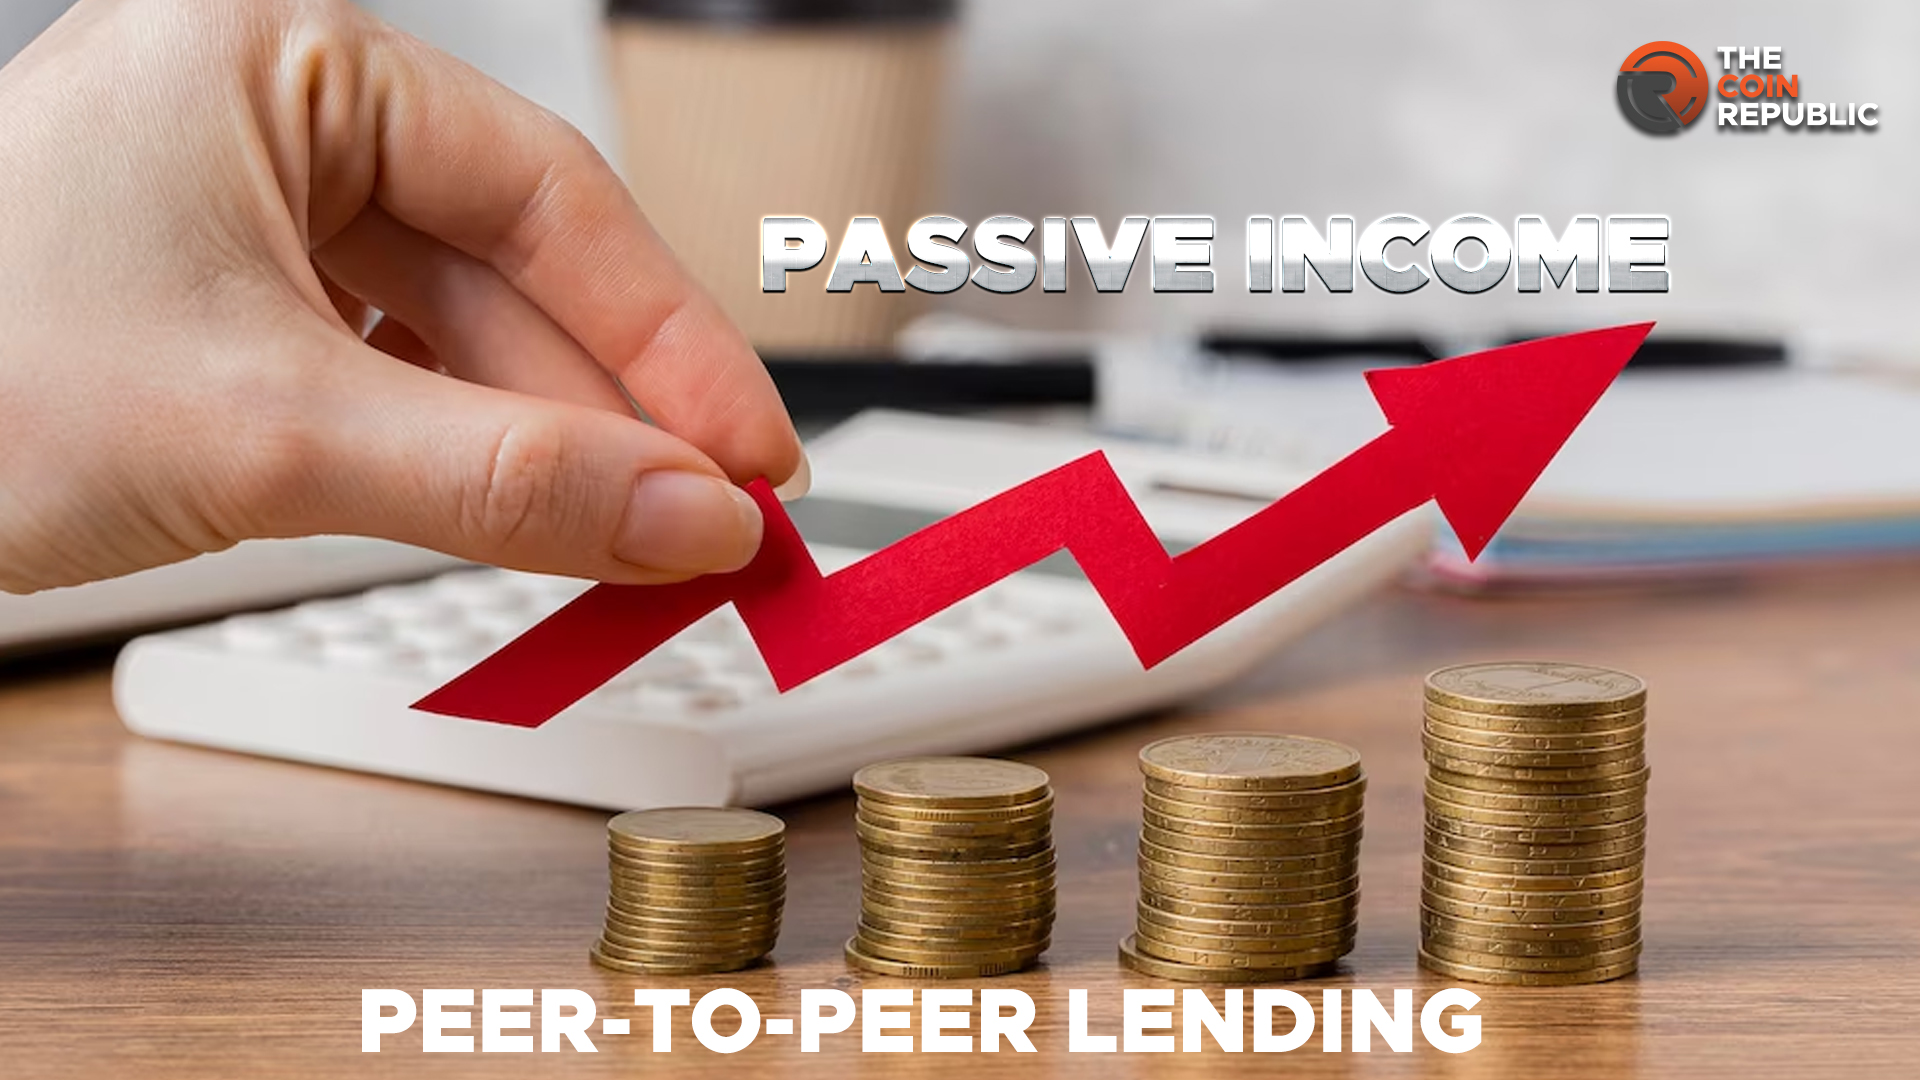 Peer-to-Peer Lending: How is it a Good Source of Passive Income?